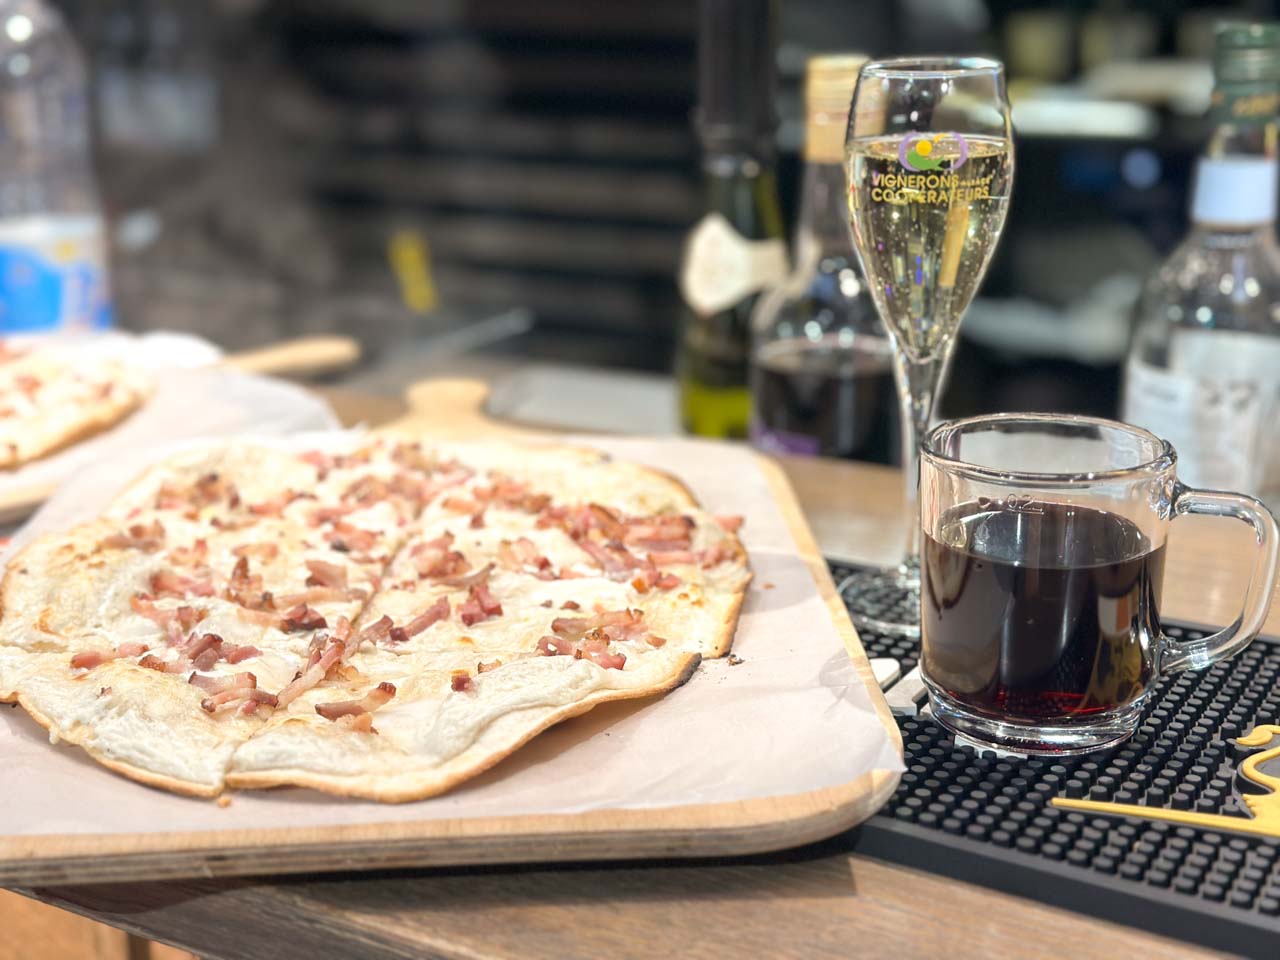 An Alsatian tarte flambée with diced bacon on top, next to a glass of Cremant D'Alsace wine and a cup of mulled wine